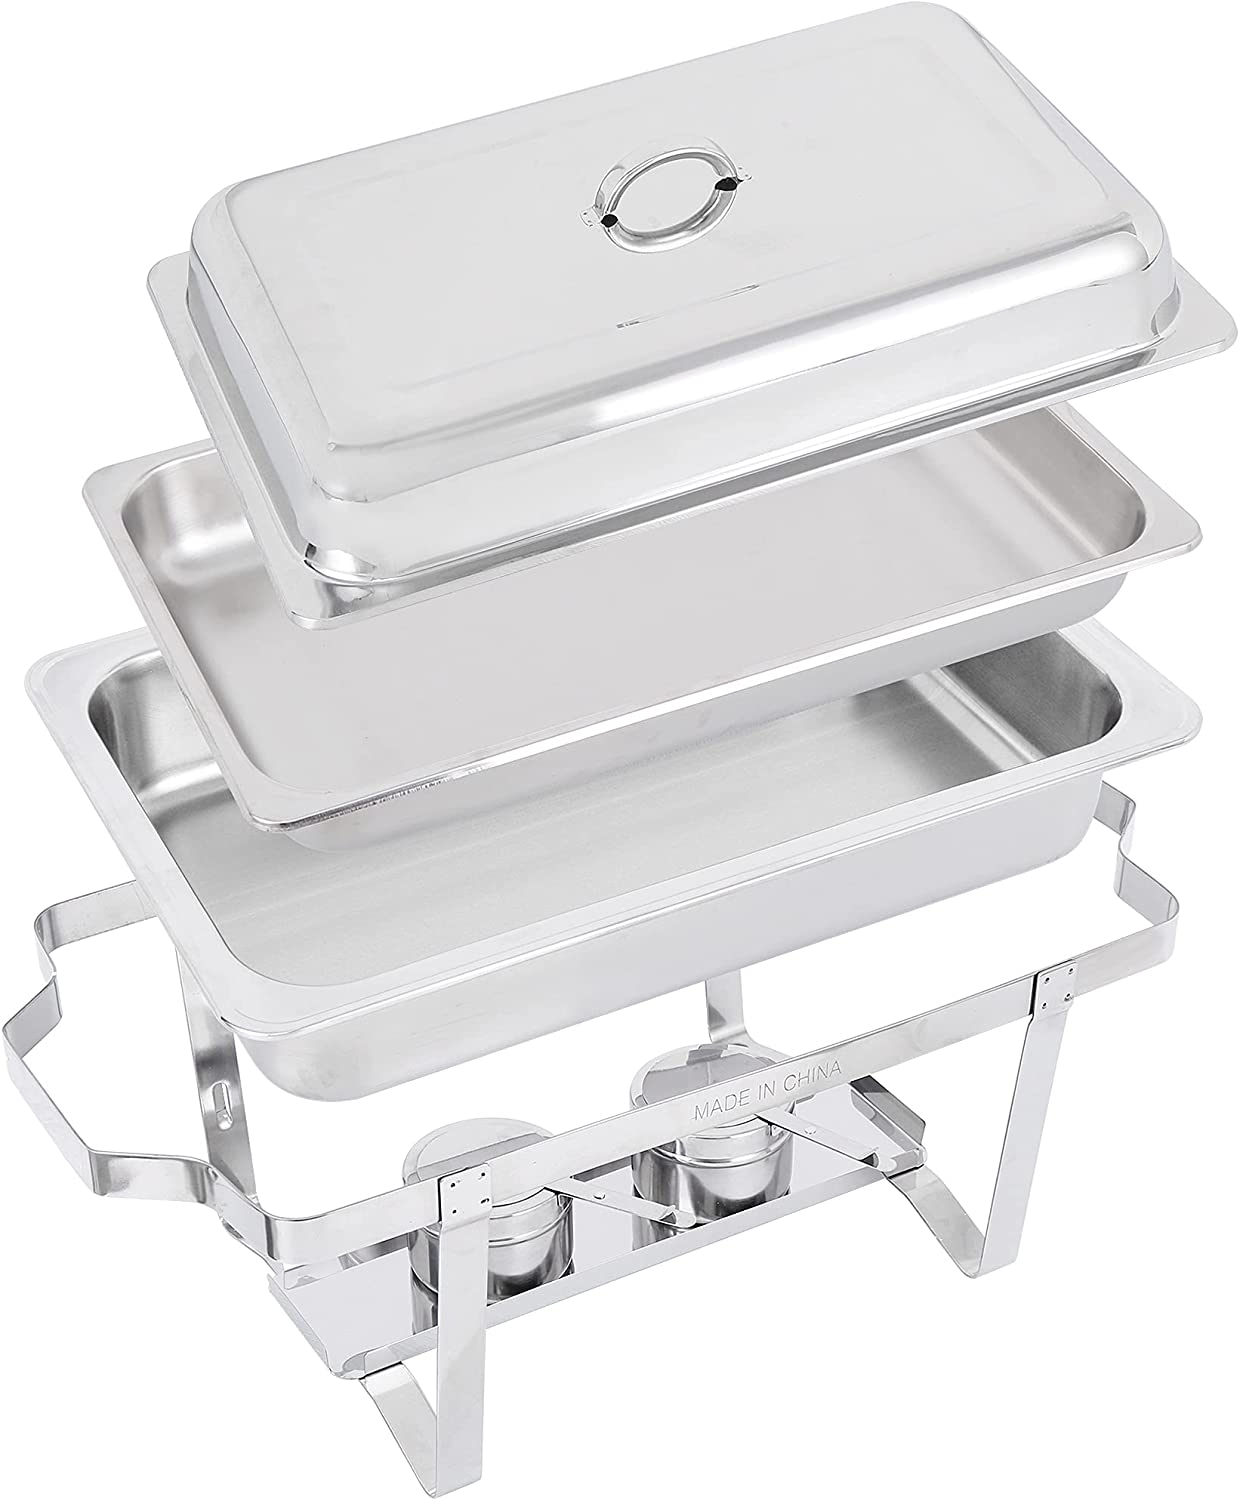 4 Packs Chafing Dish Buffet Set, 8 Quart Stainless Steel Buffet Servers and Warmers for Party Catering, Complete Chafer Set with Water Pan, Chafing Fuel Holder